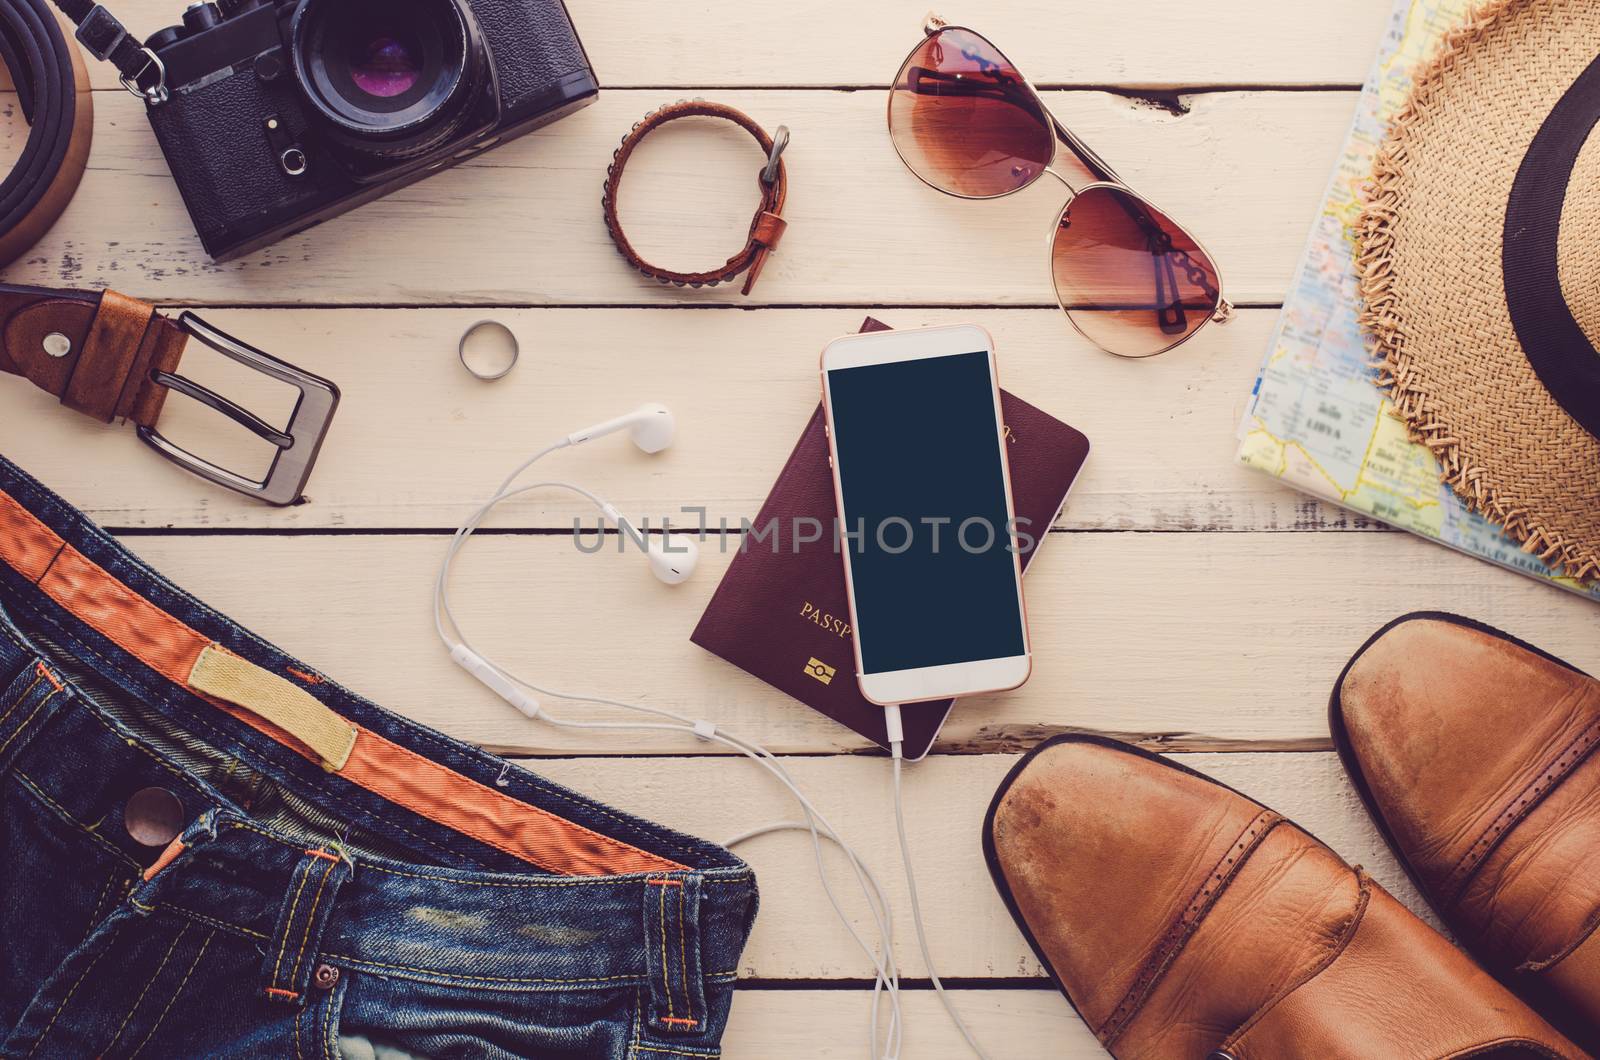 Travel accessories costumes. Passports, luggage, The cost of travel prepared for the trip. by photobyphotoboy